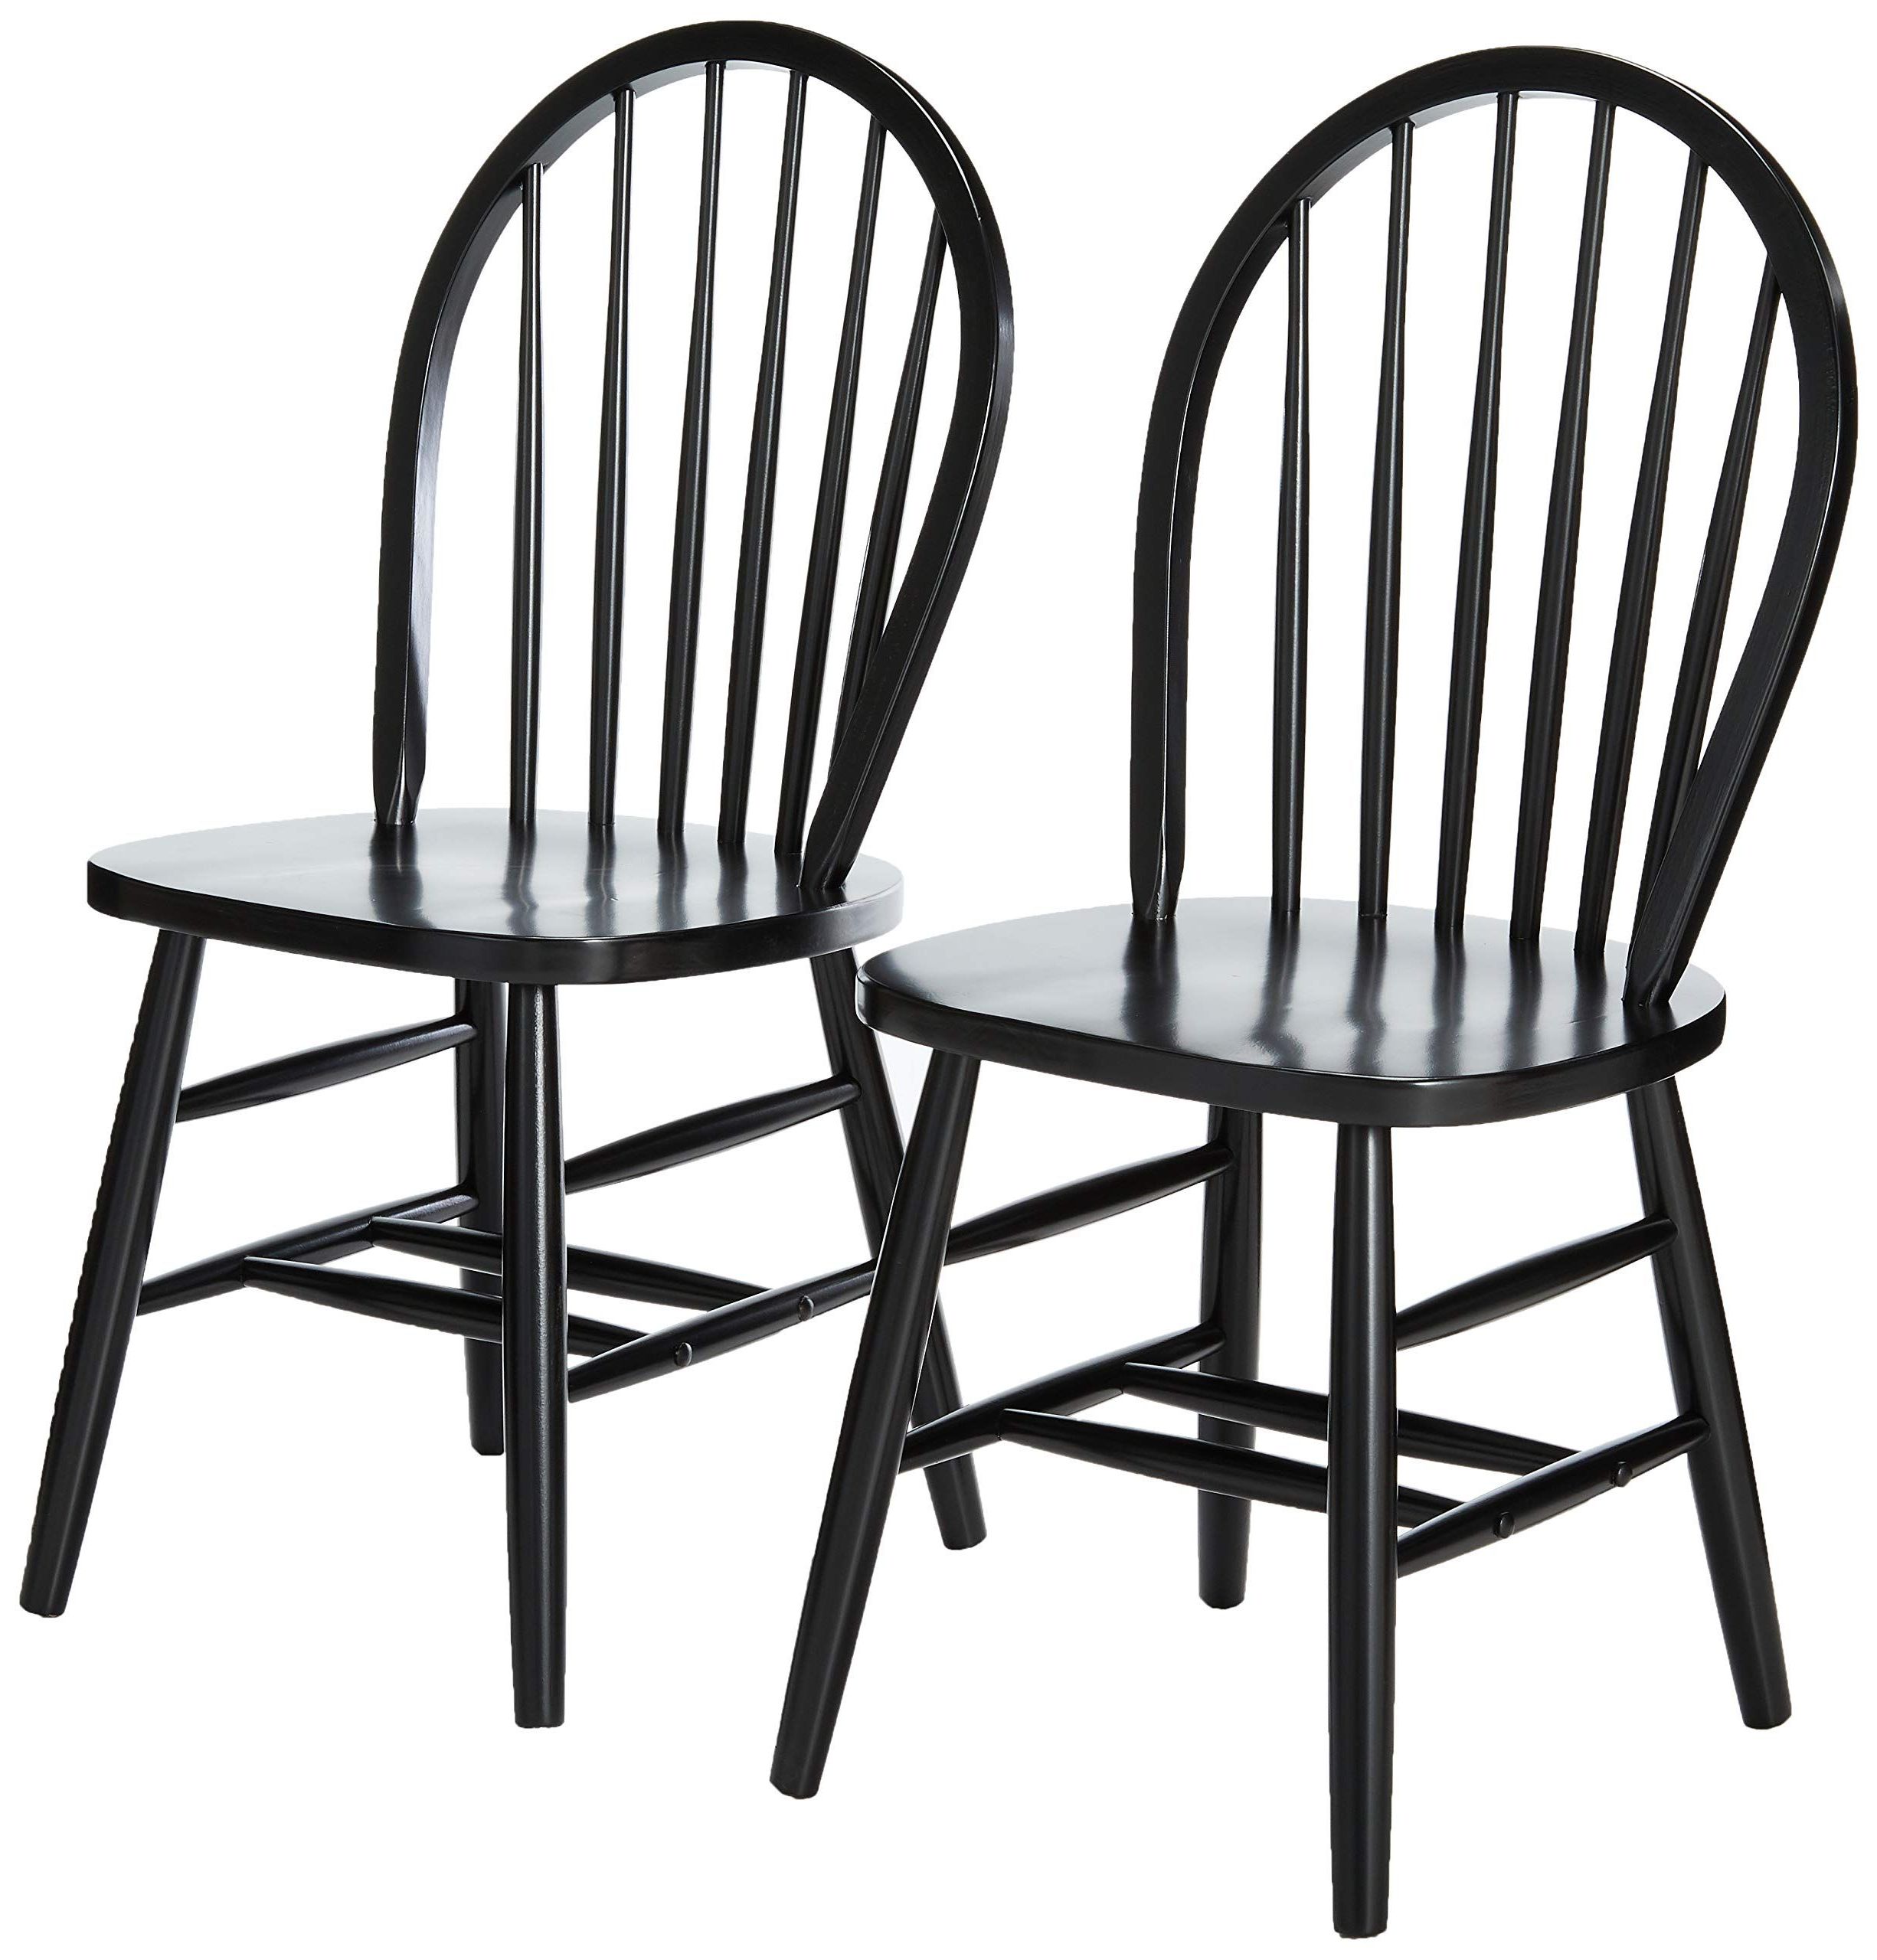 Winsome Windsor 2 Pc Set Rta Black Chair (View 7 of 15)